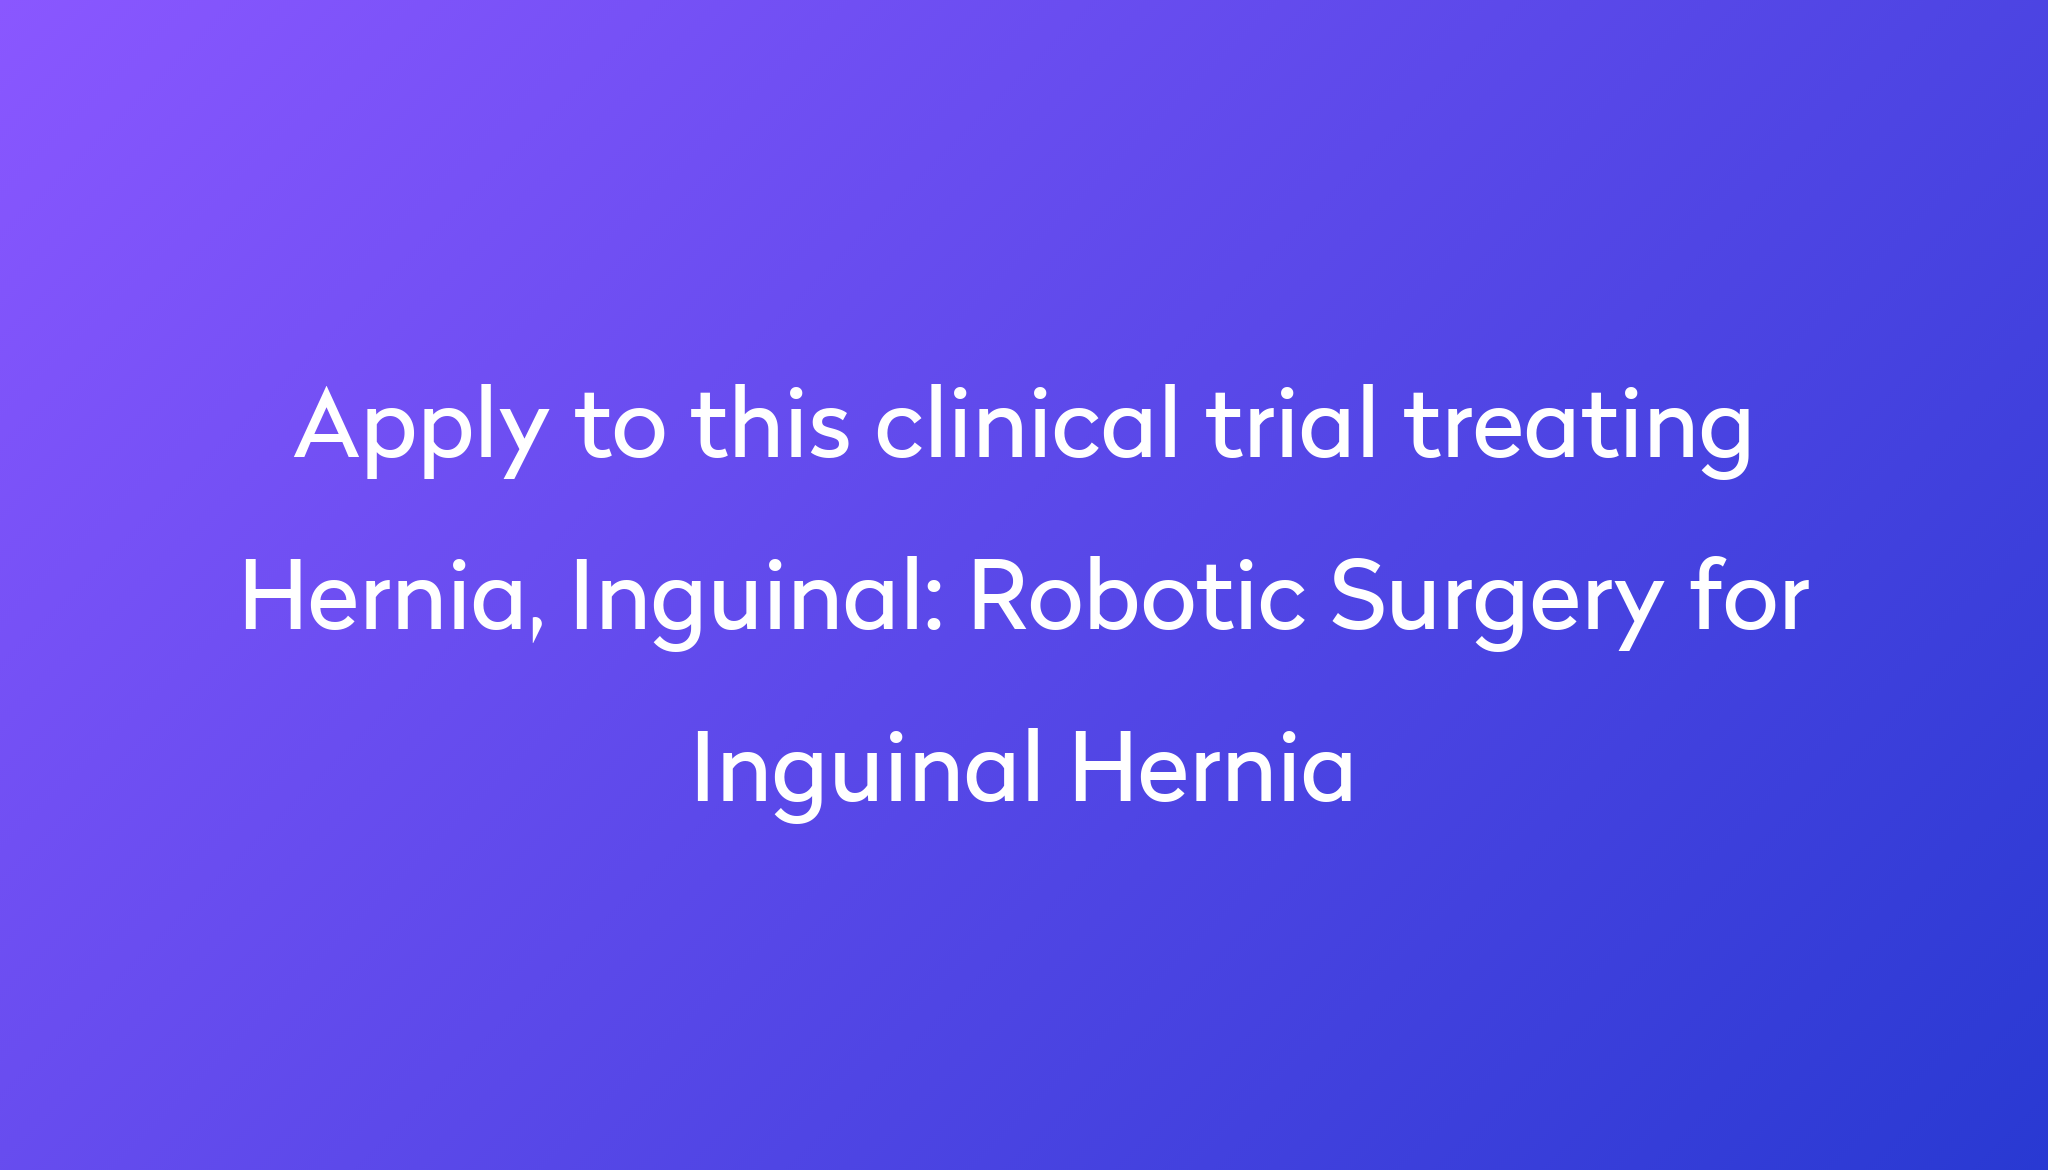 Robotic Surgery For Inguinal Hernia Clinical Trial 2023 Power